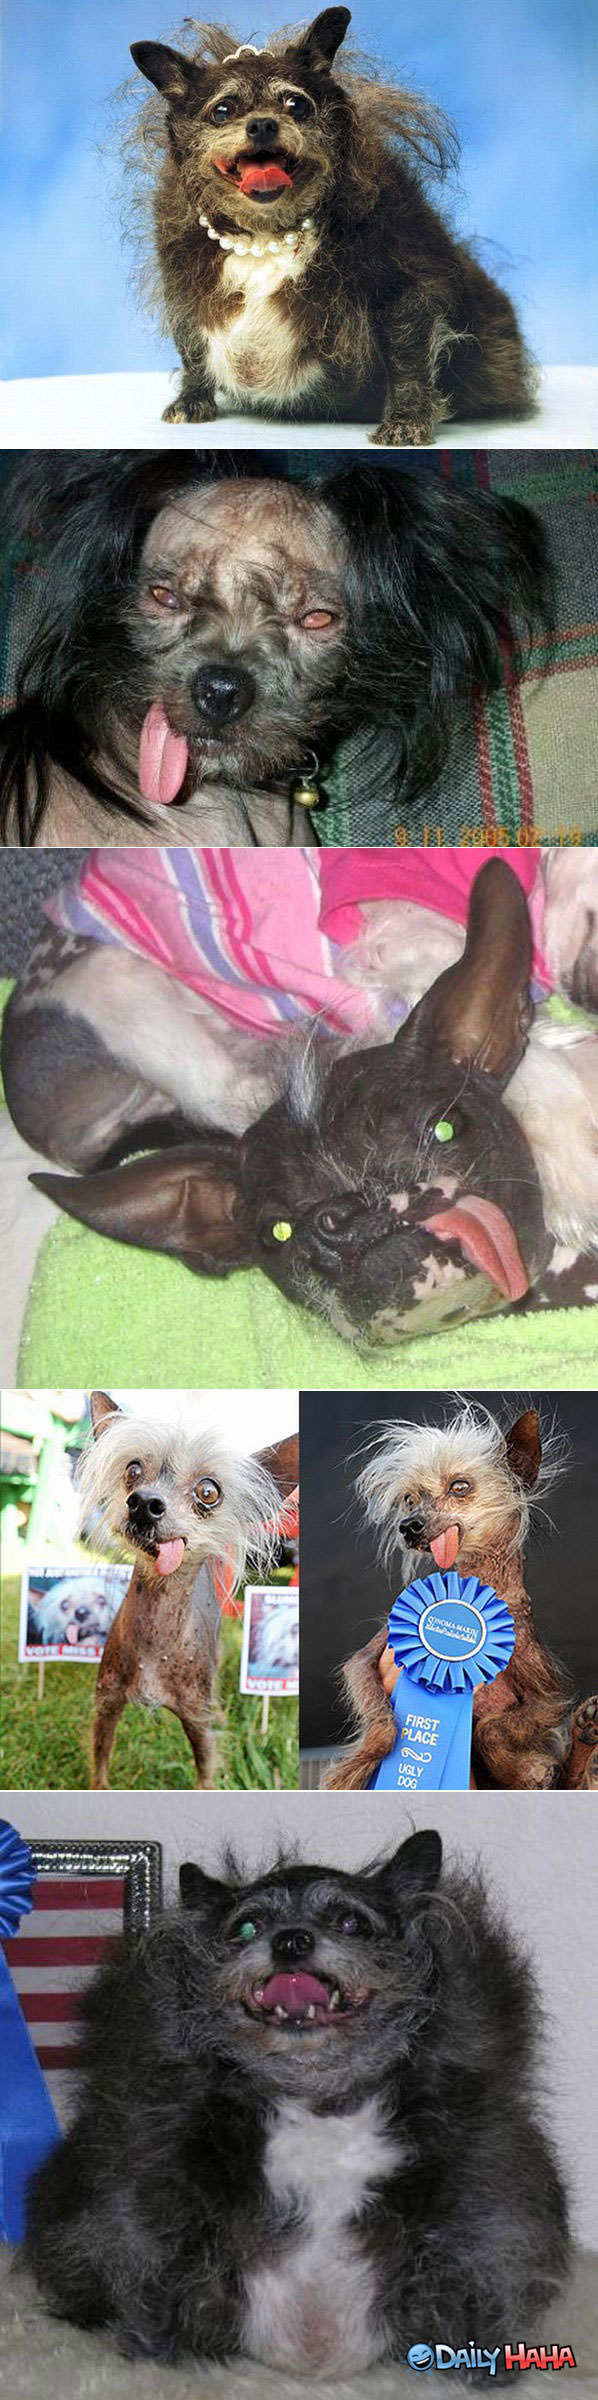 Ugly Dogs funny picture